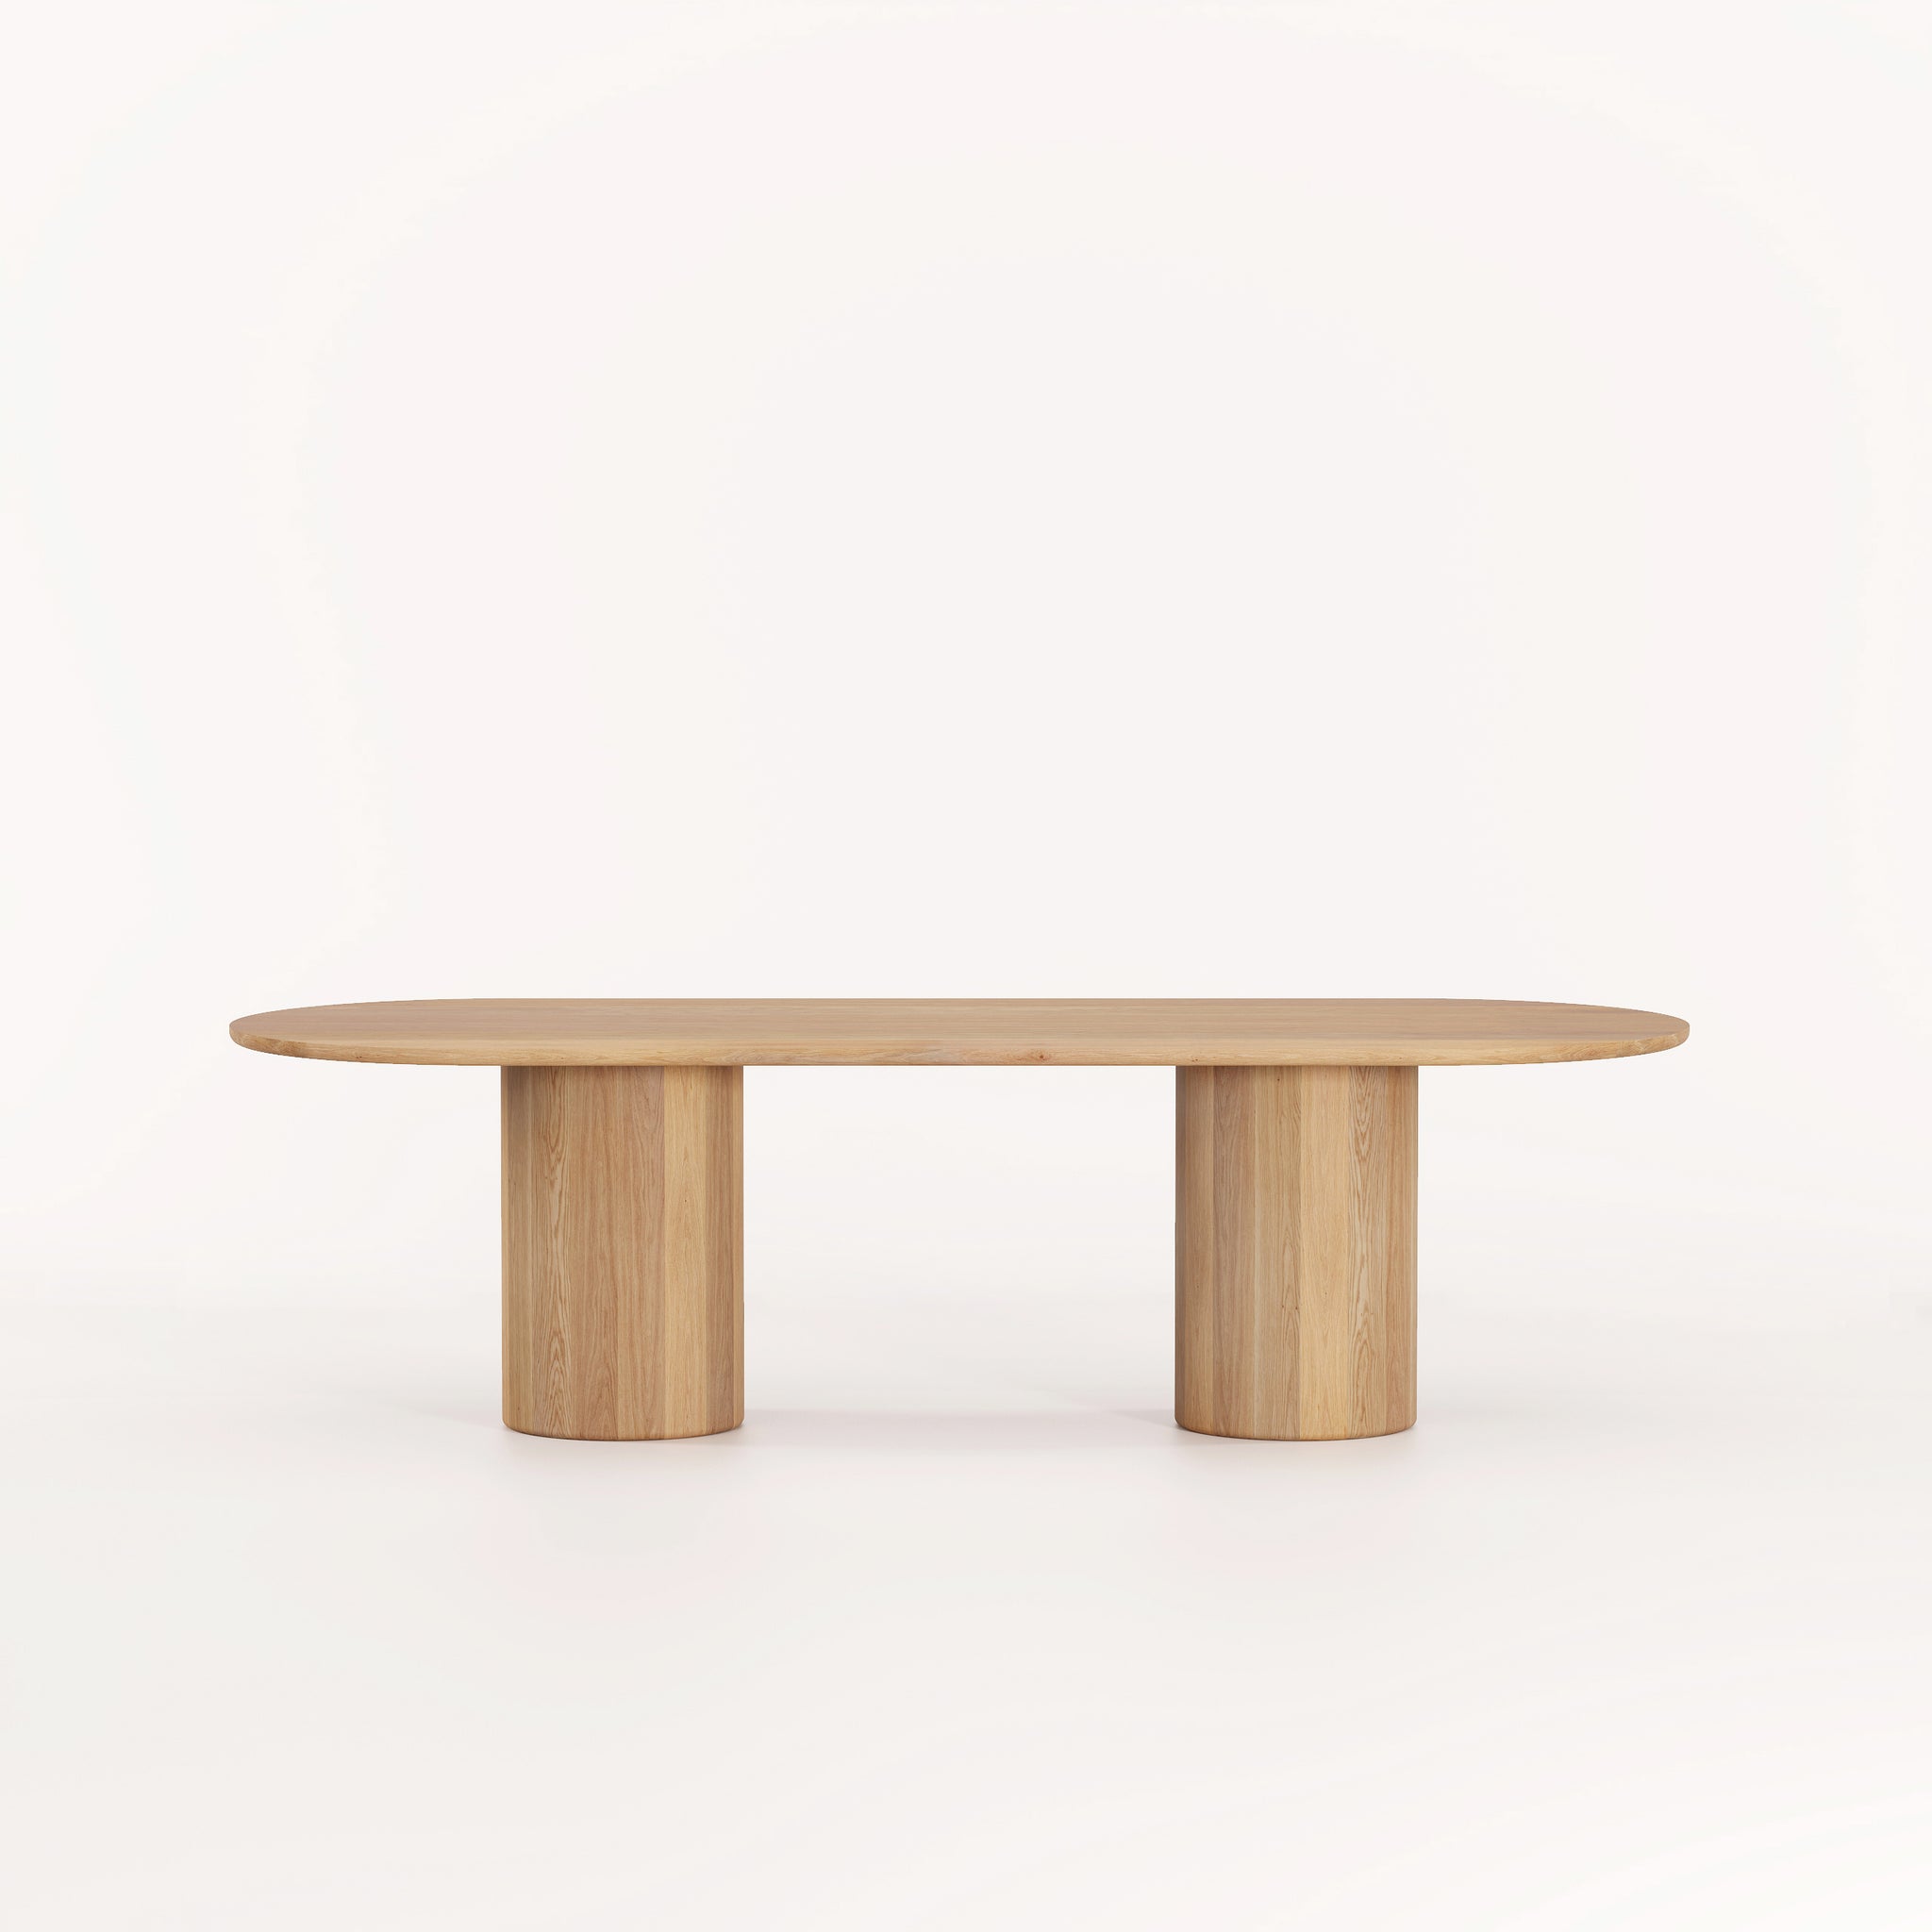 Border table by Mast Furniture. Modern dining table made in Australia. 